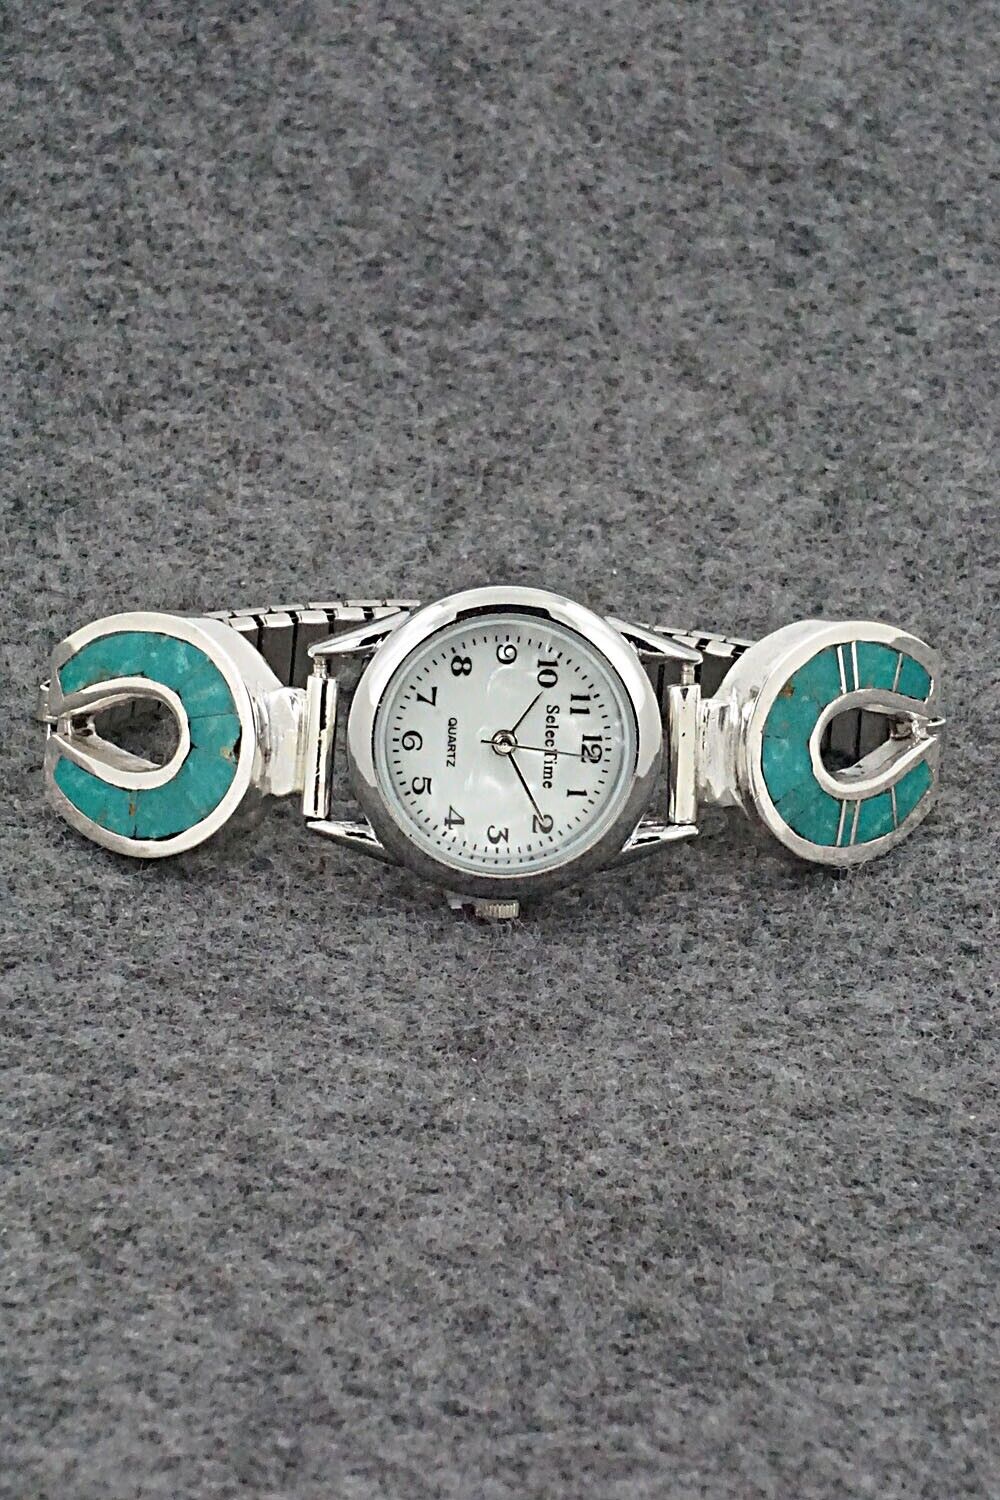 Turquoise & Sterling Silver Watch Bracelet - James Manygoats